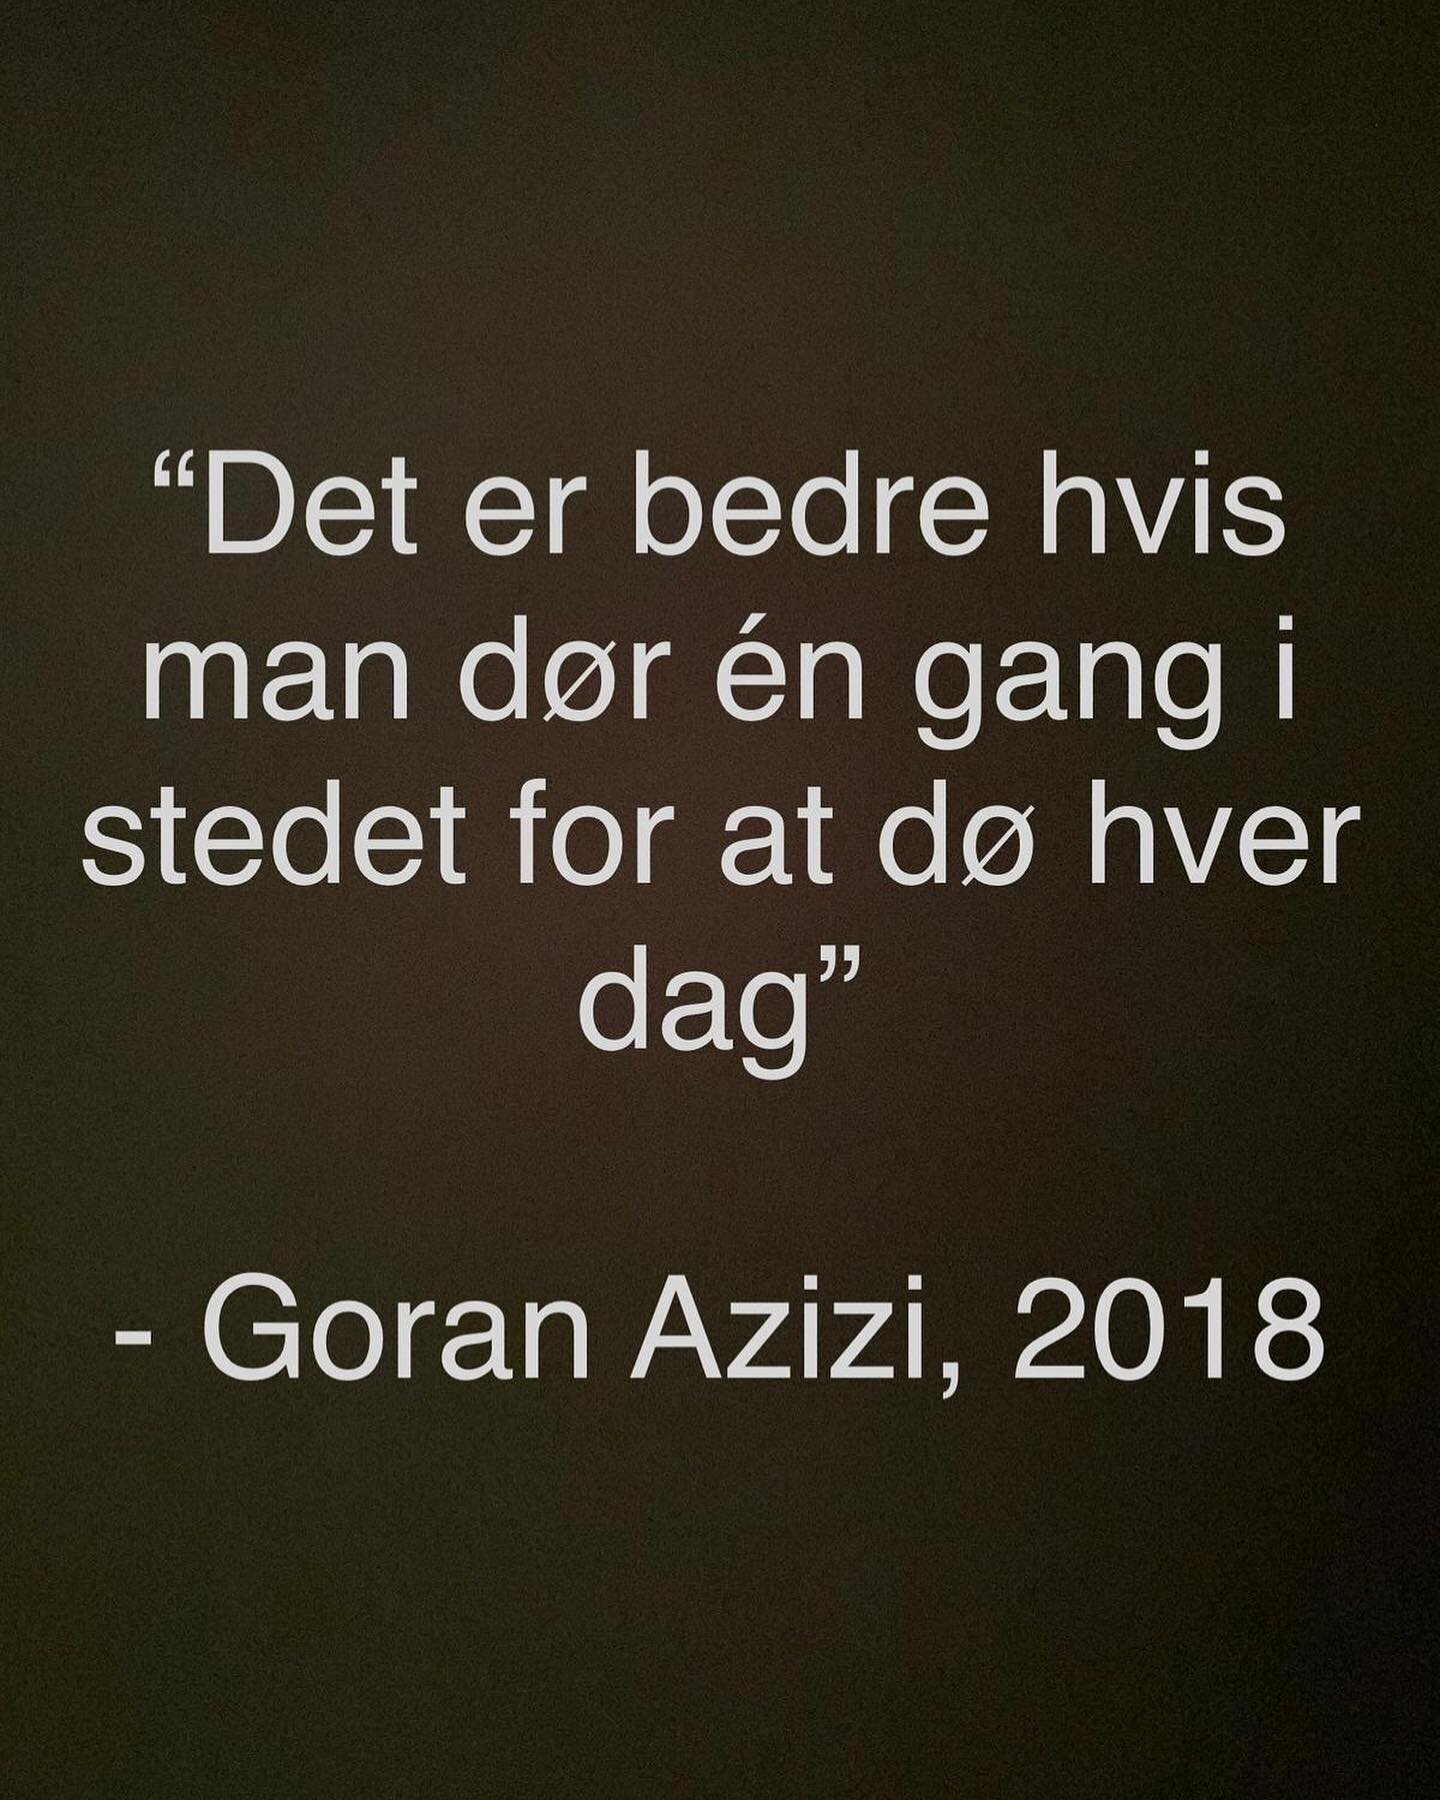 This quote from Goran Azizi is from  2018. The story of the Azizi family has been told in the press many times, but five years later, nothing has changed.

The Azizi family have been refugees for 44 years. Most of them were born as stateless refugees